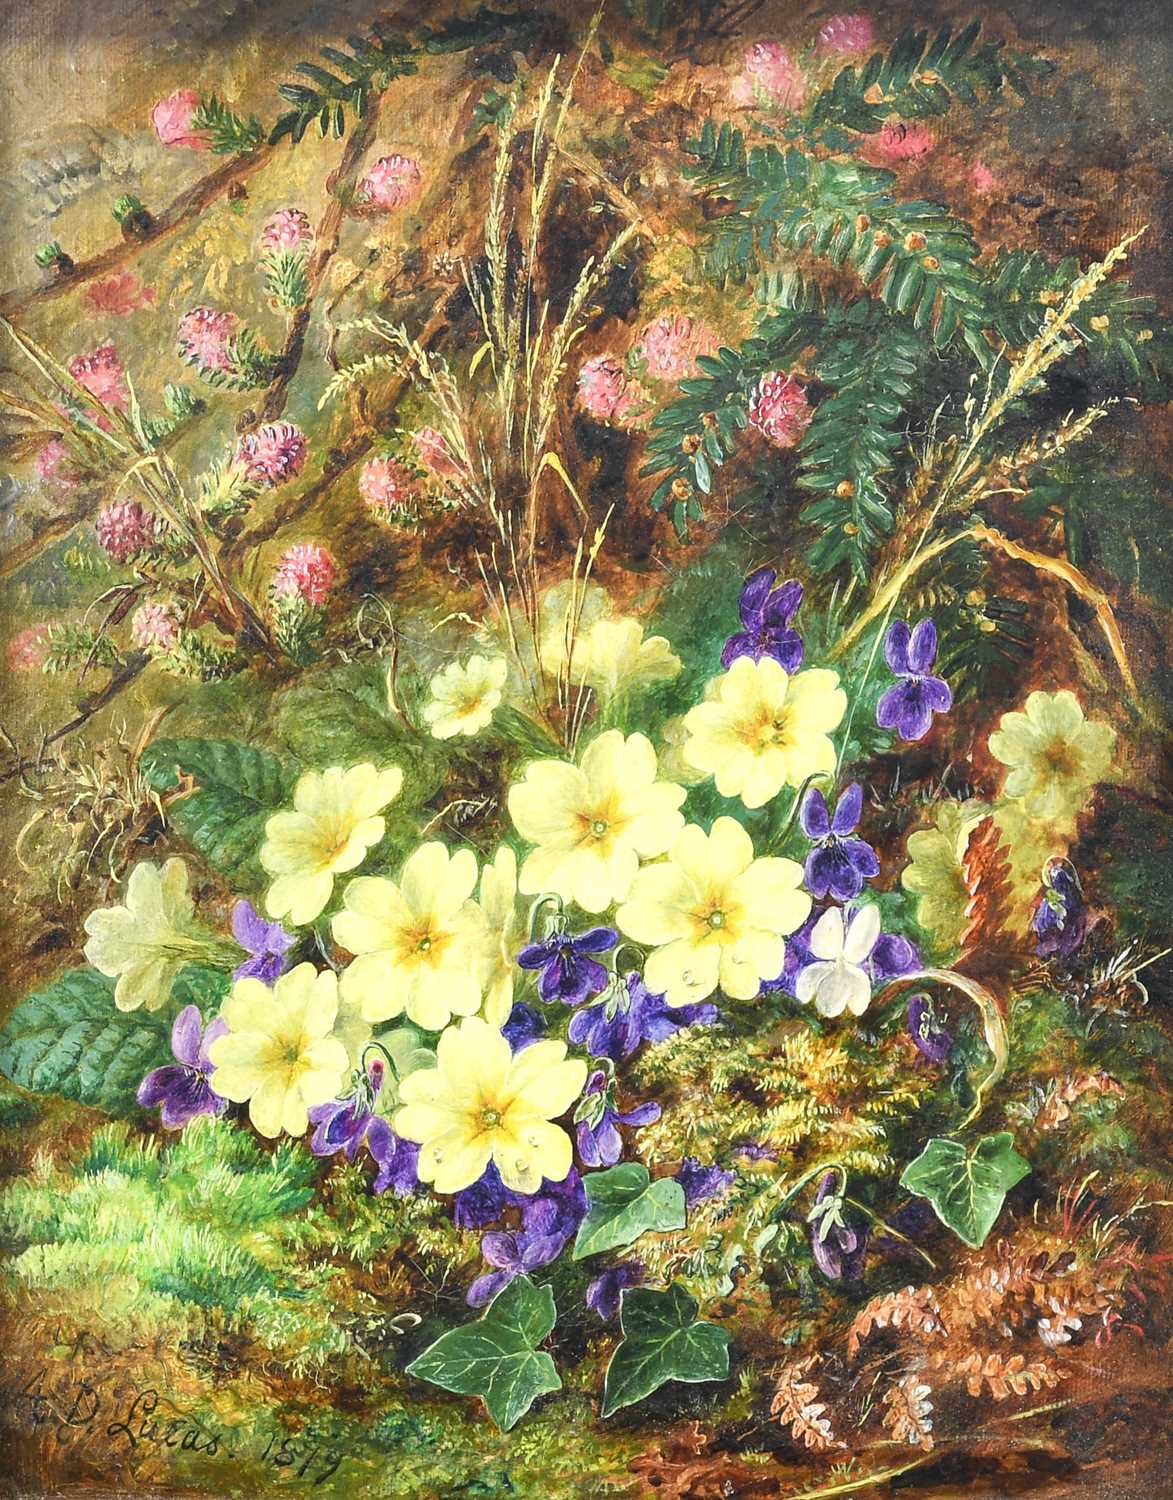 Albert Durer Lucas (1828-1918) Still life of Primroses and Violets on a mossy bank Signed and